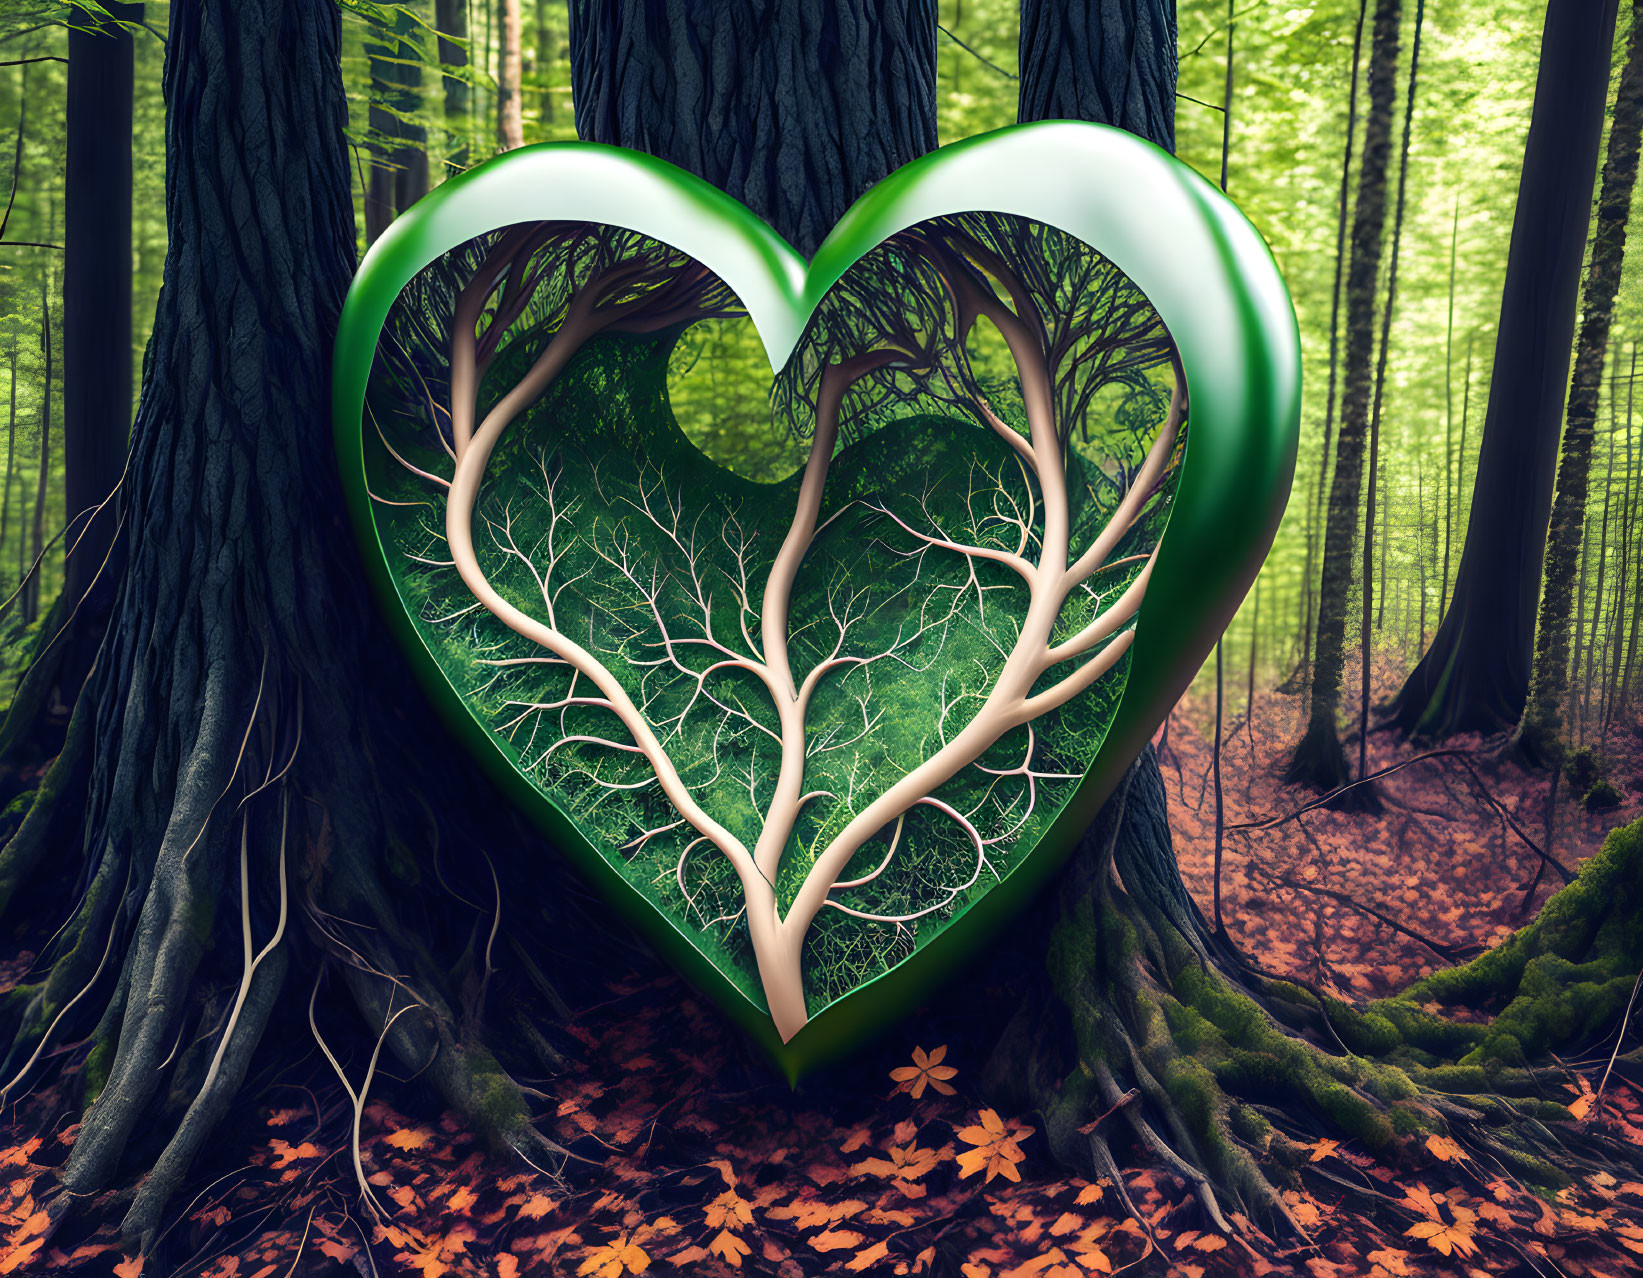 Glowing green heart with tree-like branches in mystical forest